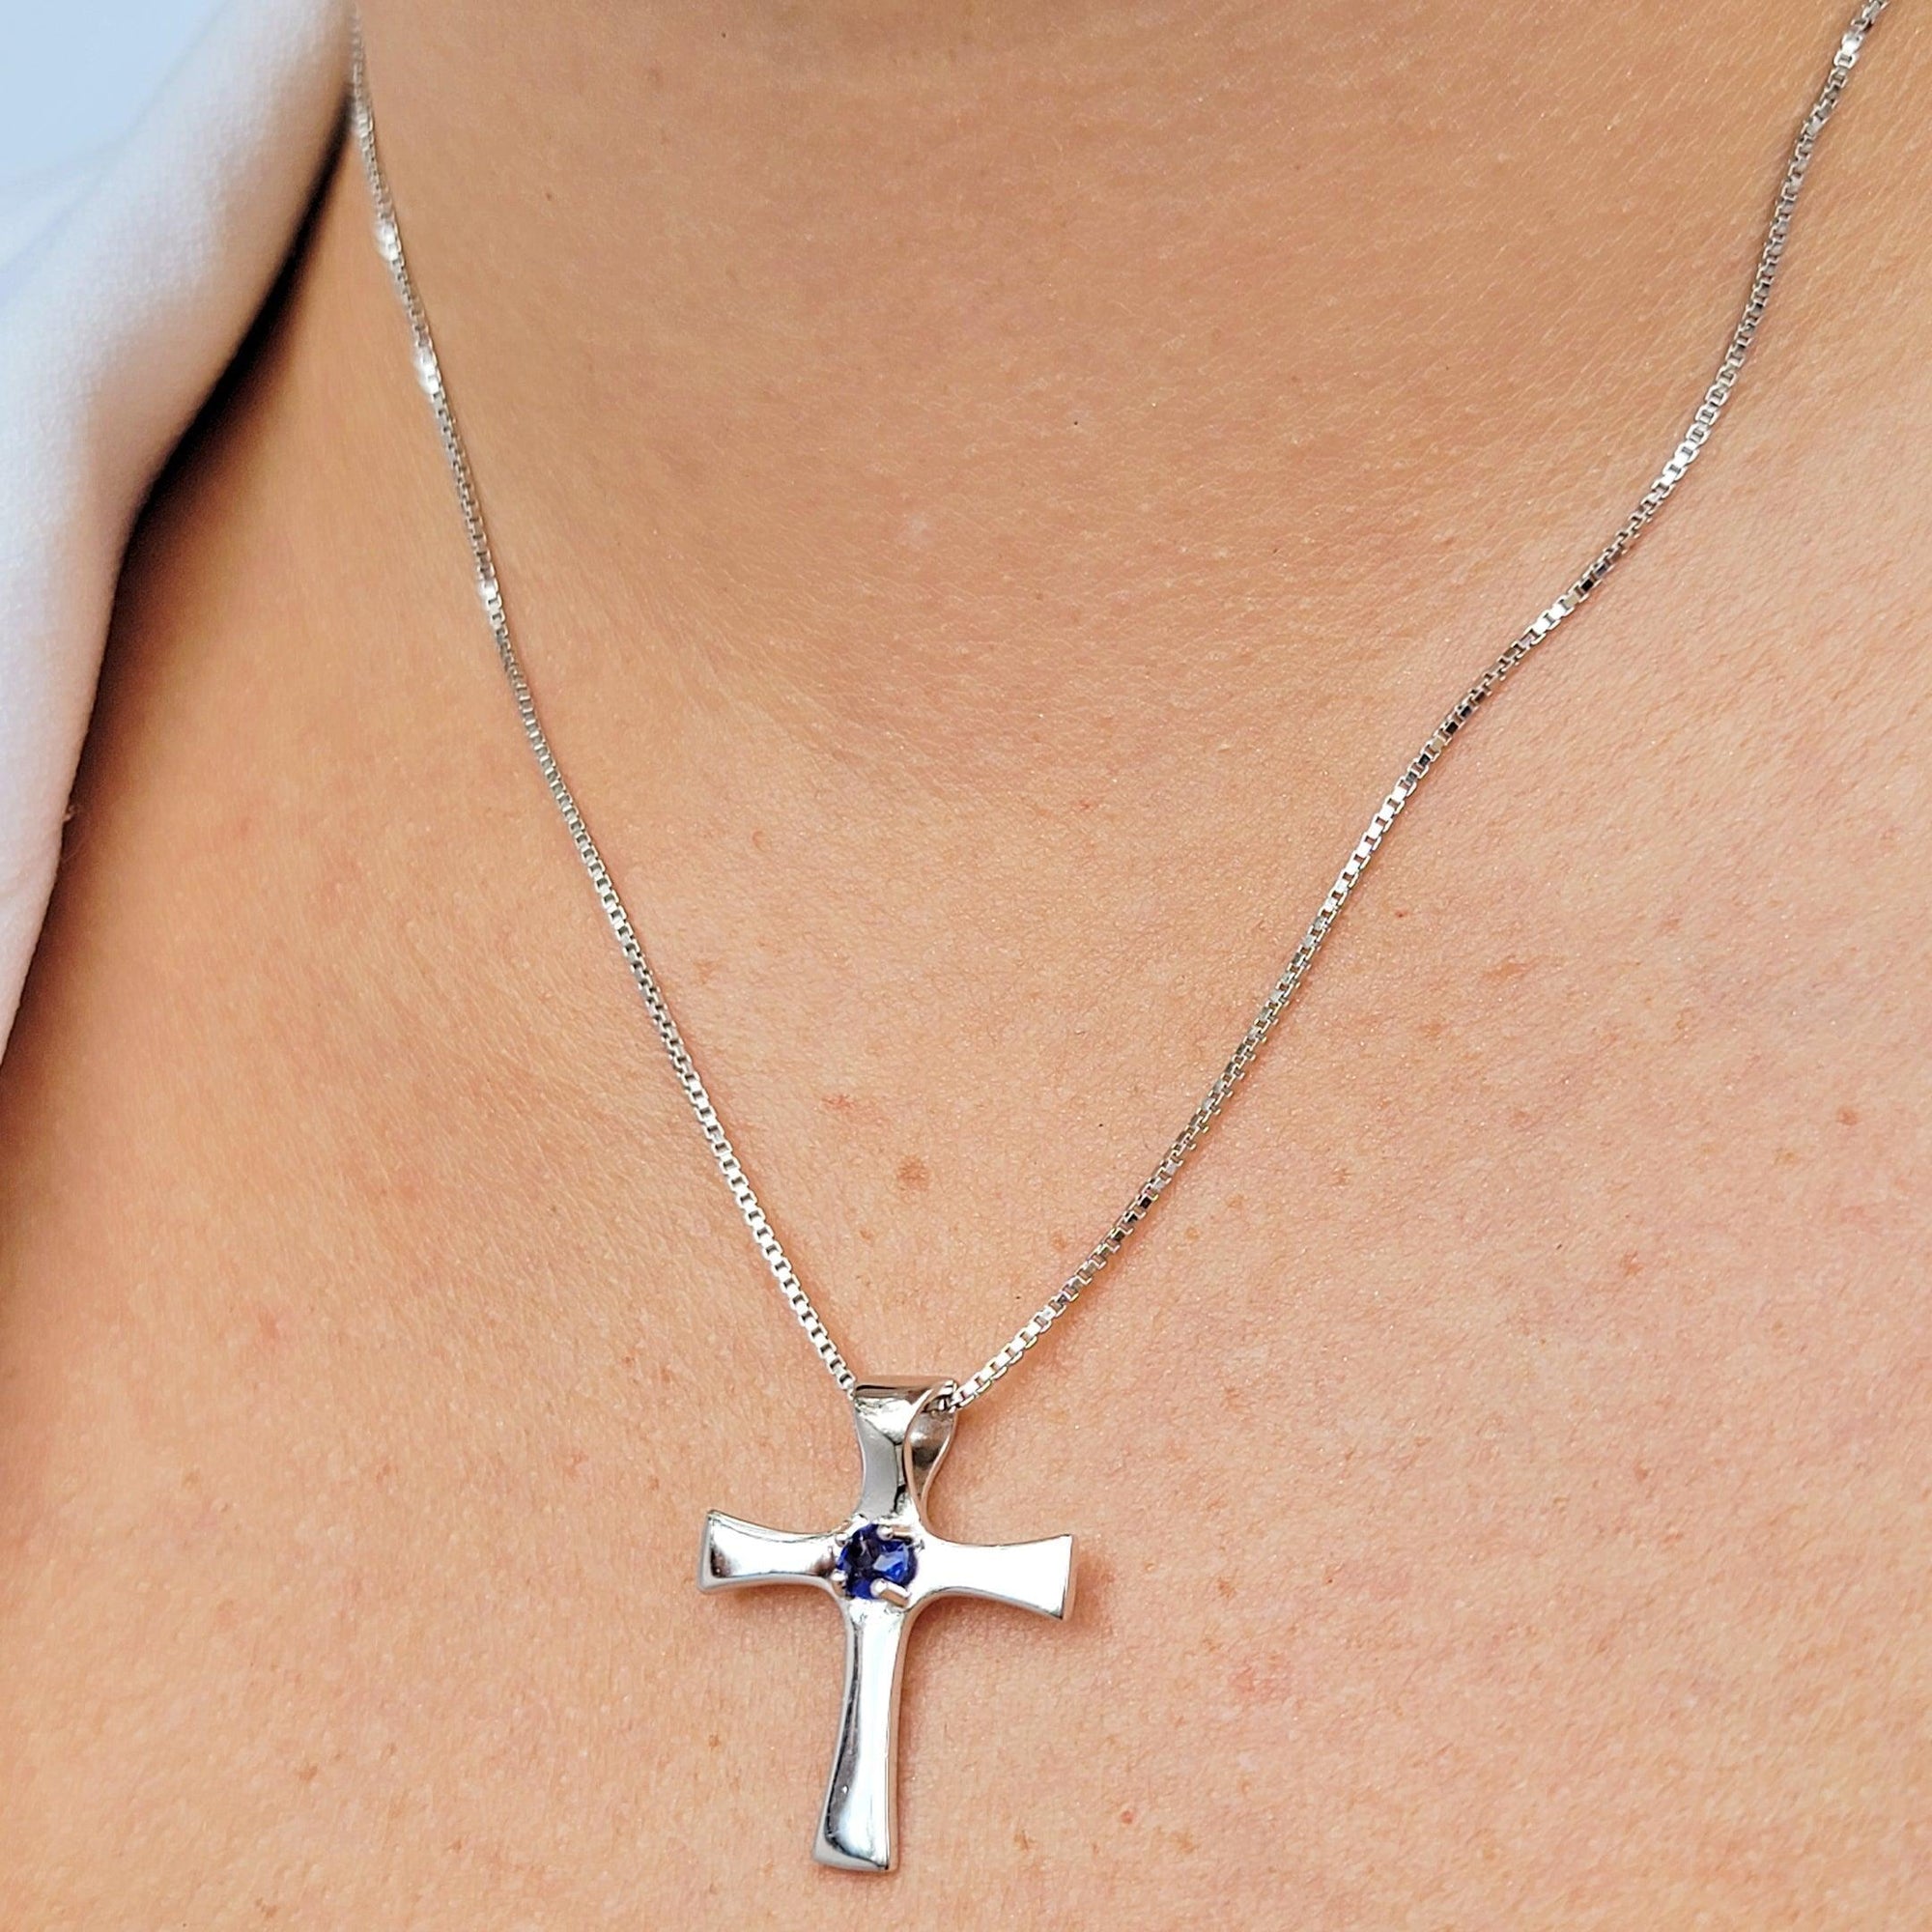 Real Sapphire Cross Necklace - Uniquelan Jewelry